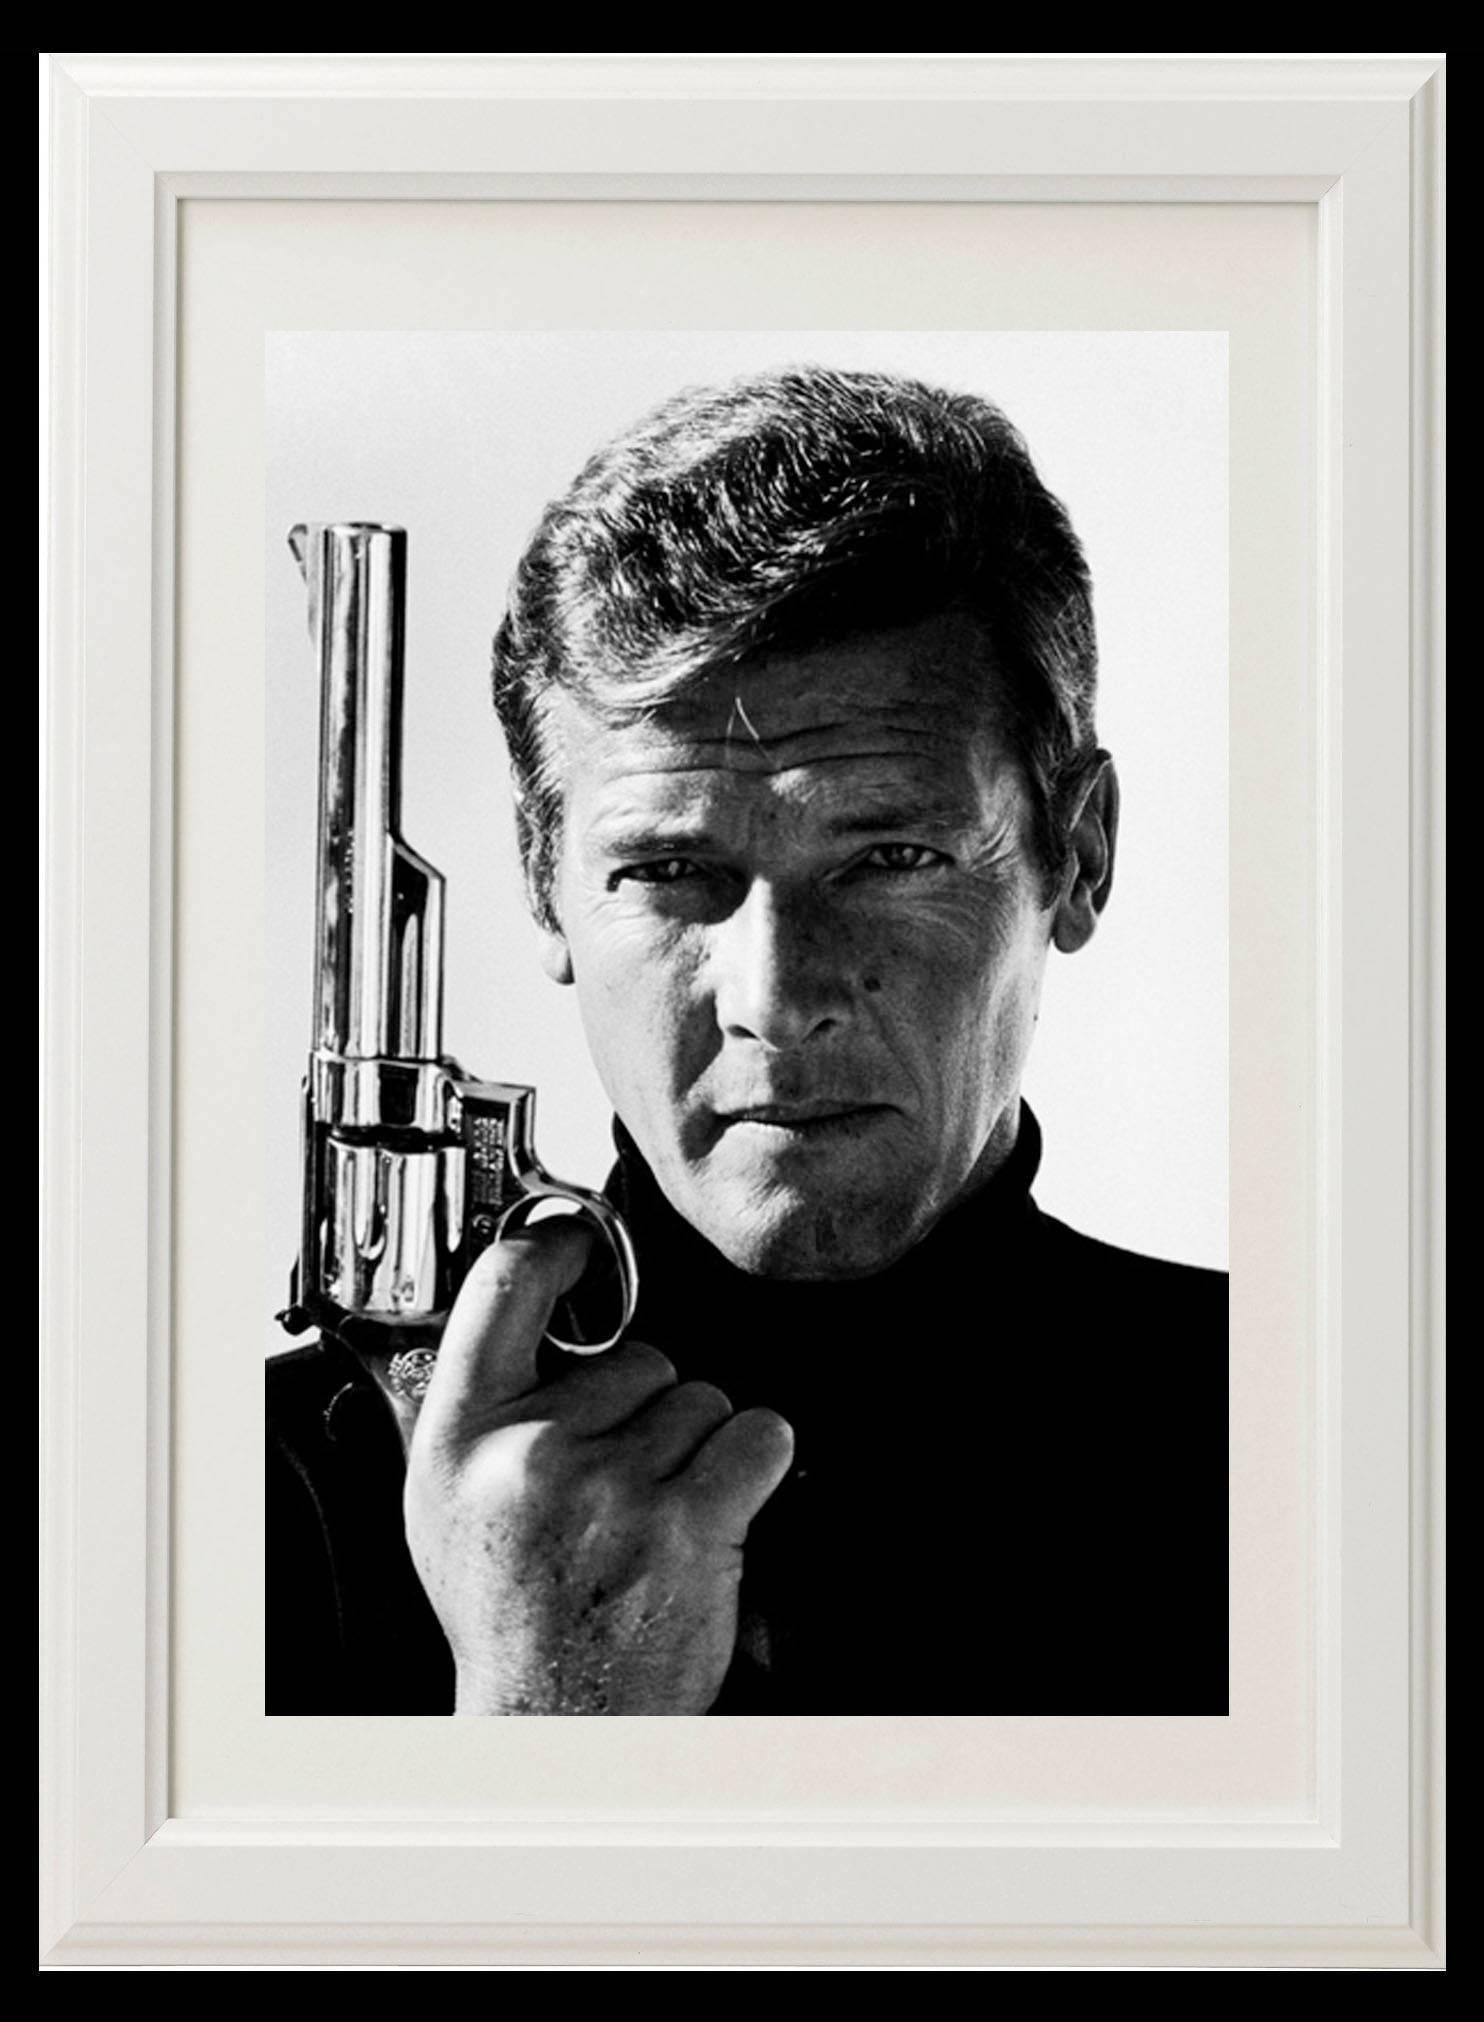 Roger Moore 007 Edition 25/50 Digitally Signed - Photograph by Terry O'Neill